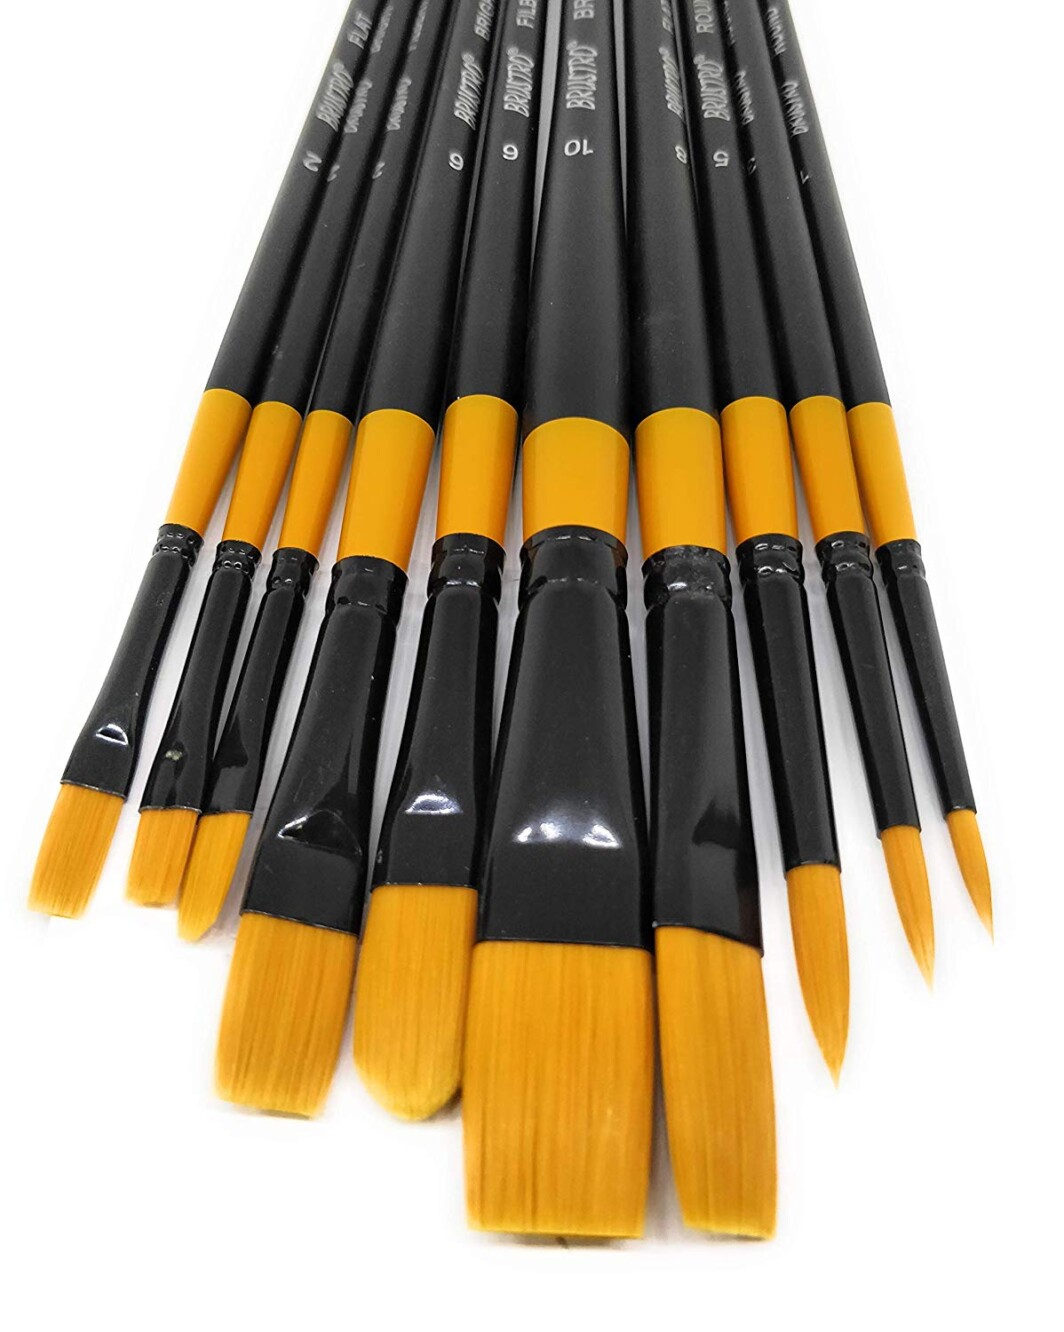 BRUSTRO Artists’ Gold TAKLON Set of 10 Brushes for Acrylics, Oil and Watercolour.-4308